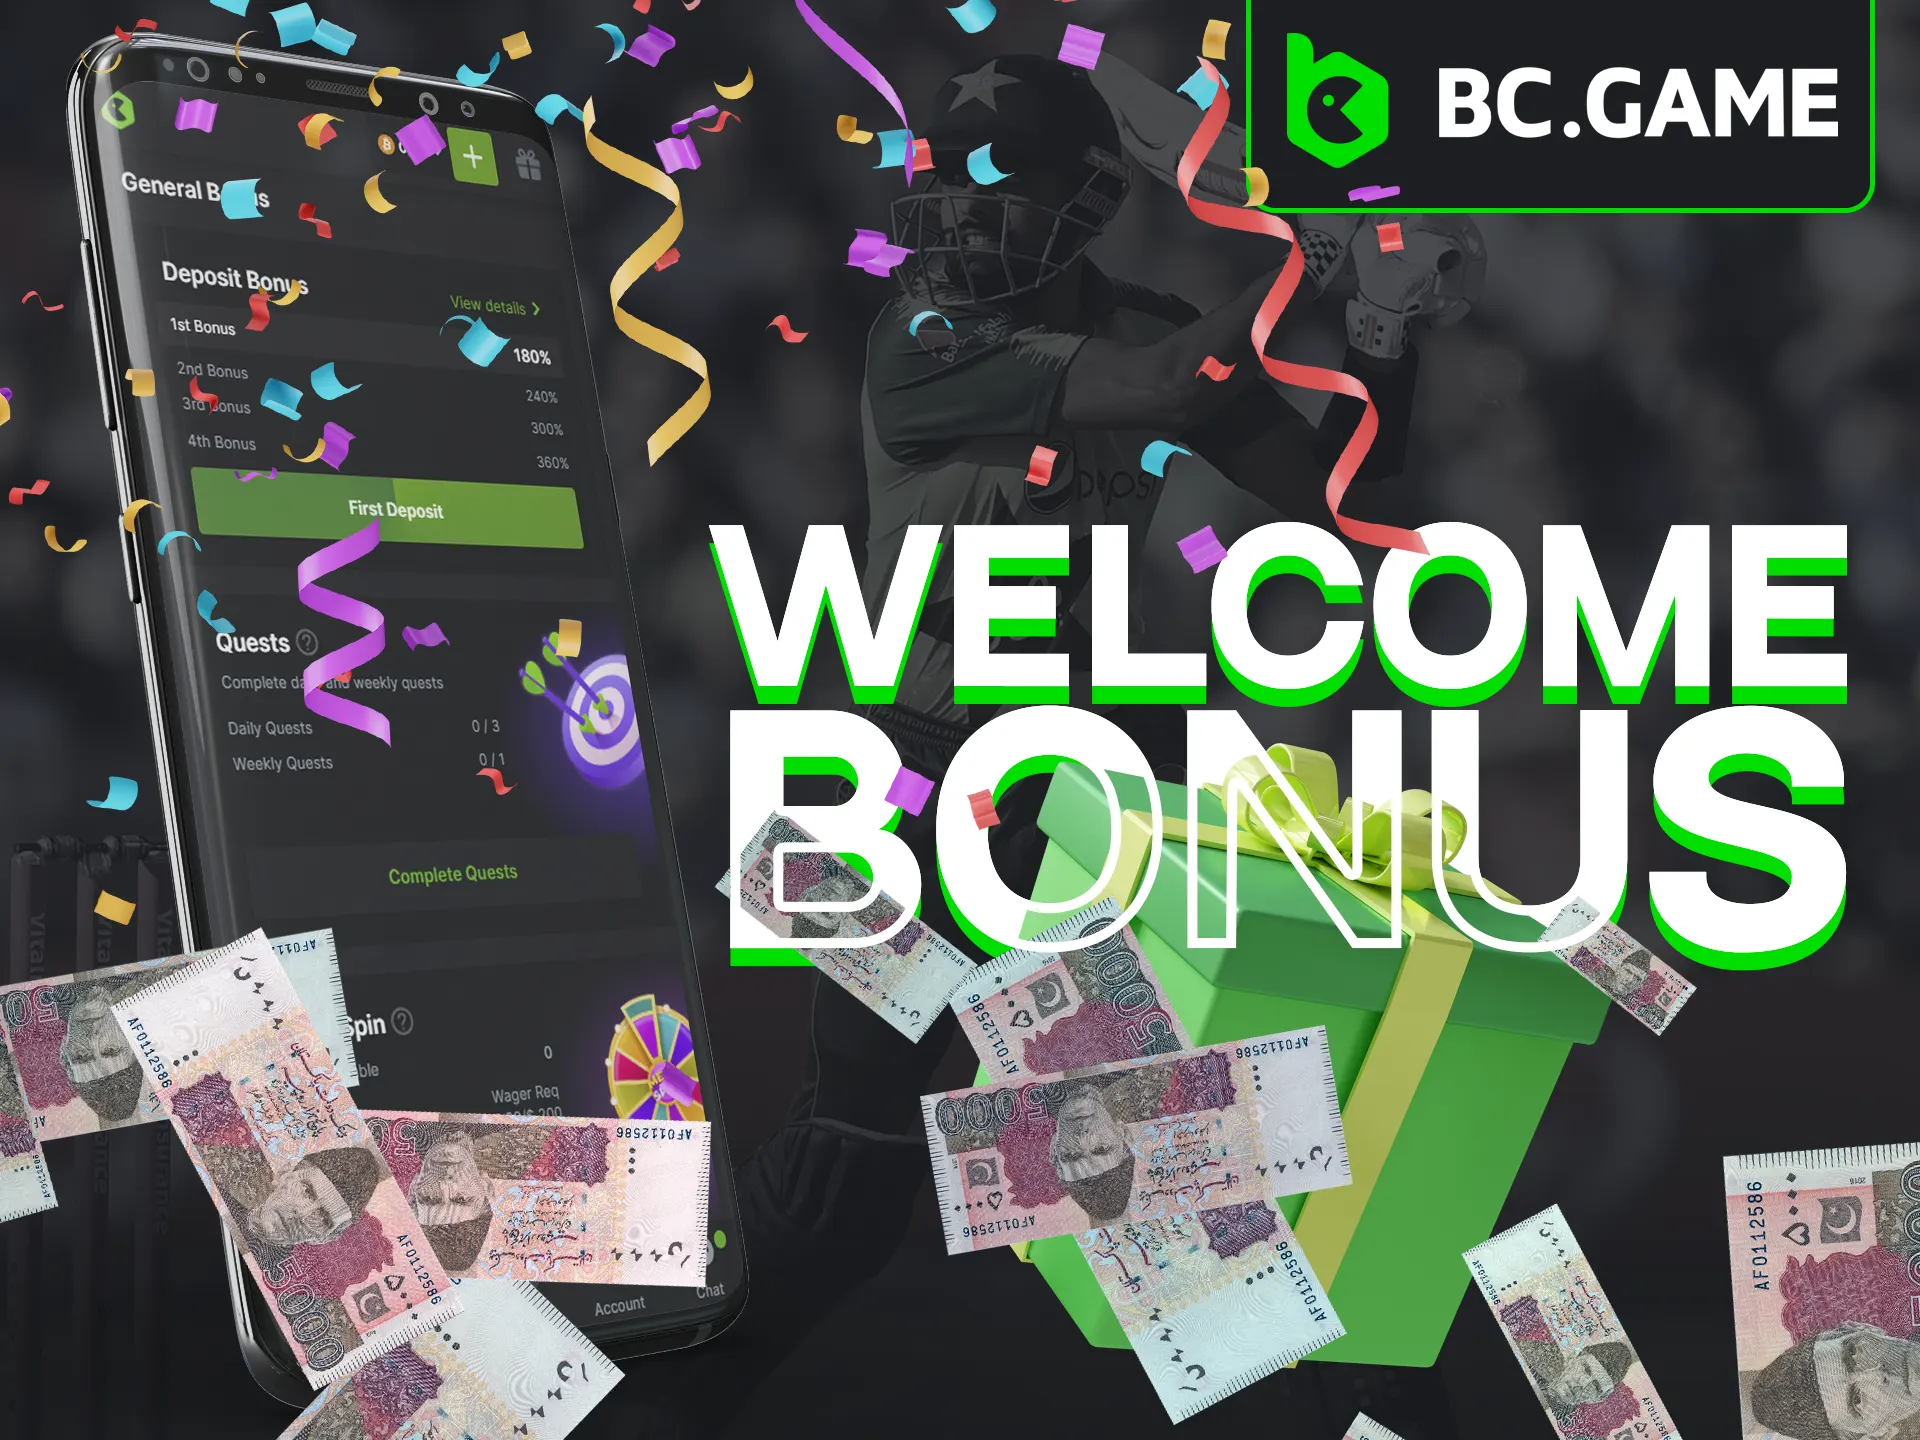 BC Game App offers a 300% Welcome Bonus.